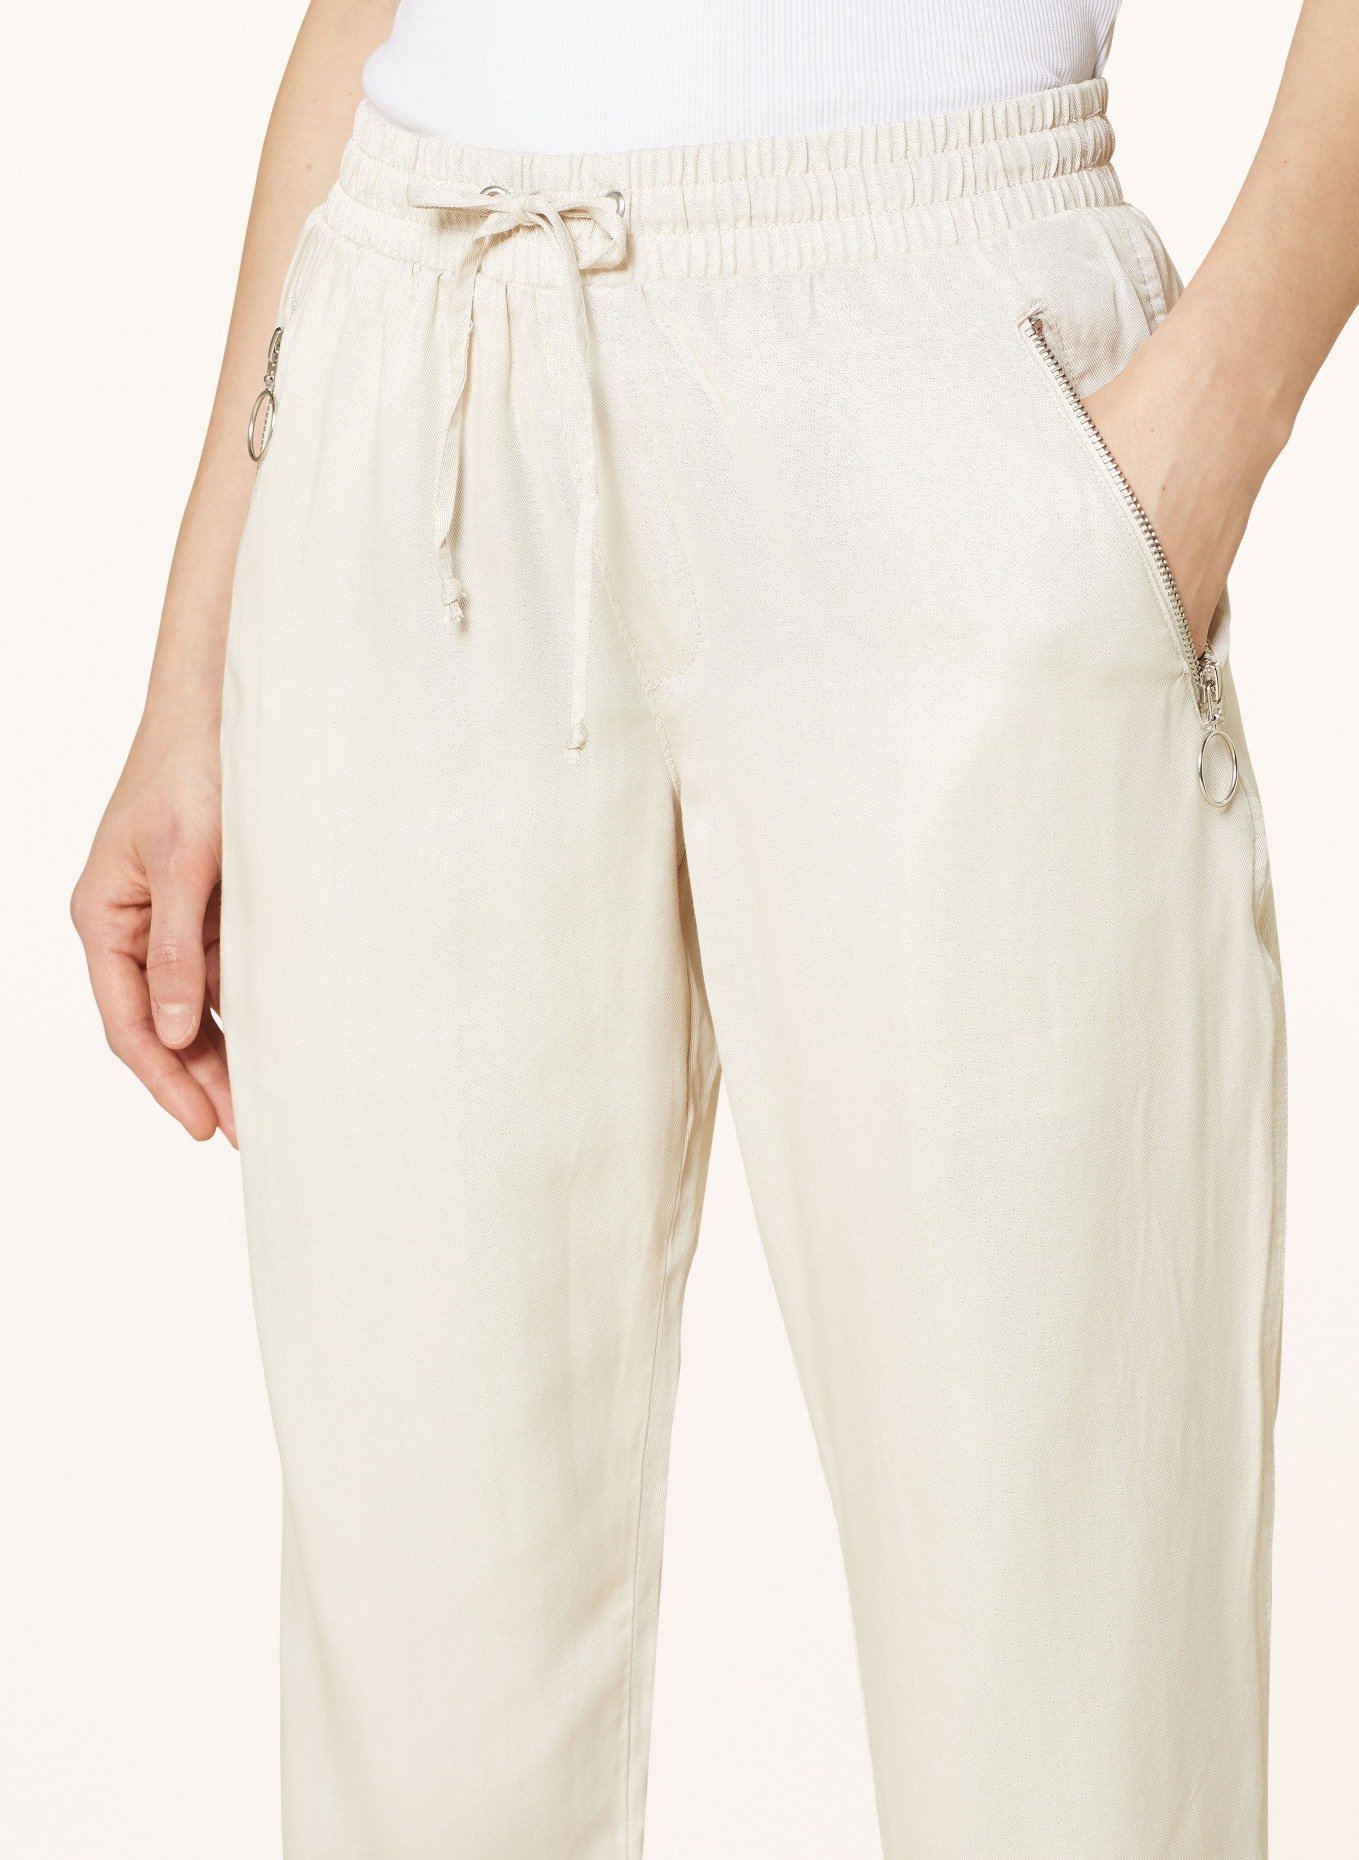 CARTOON Pants in jogger style, Color: CREAM (Image 5)